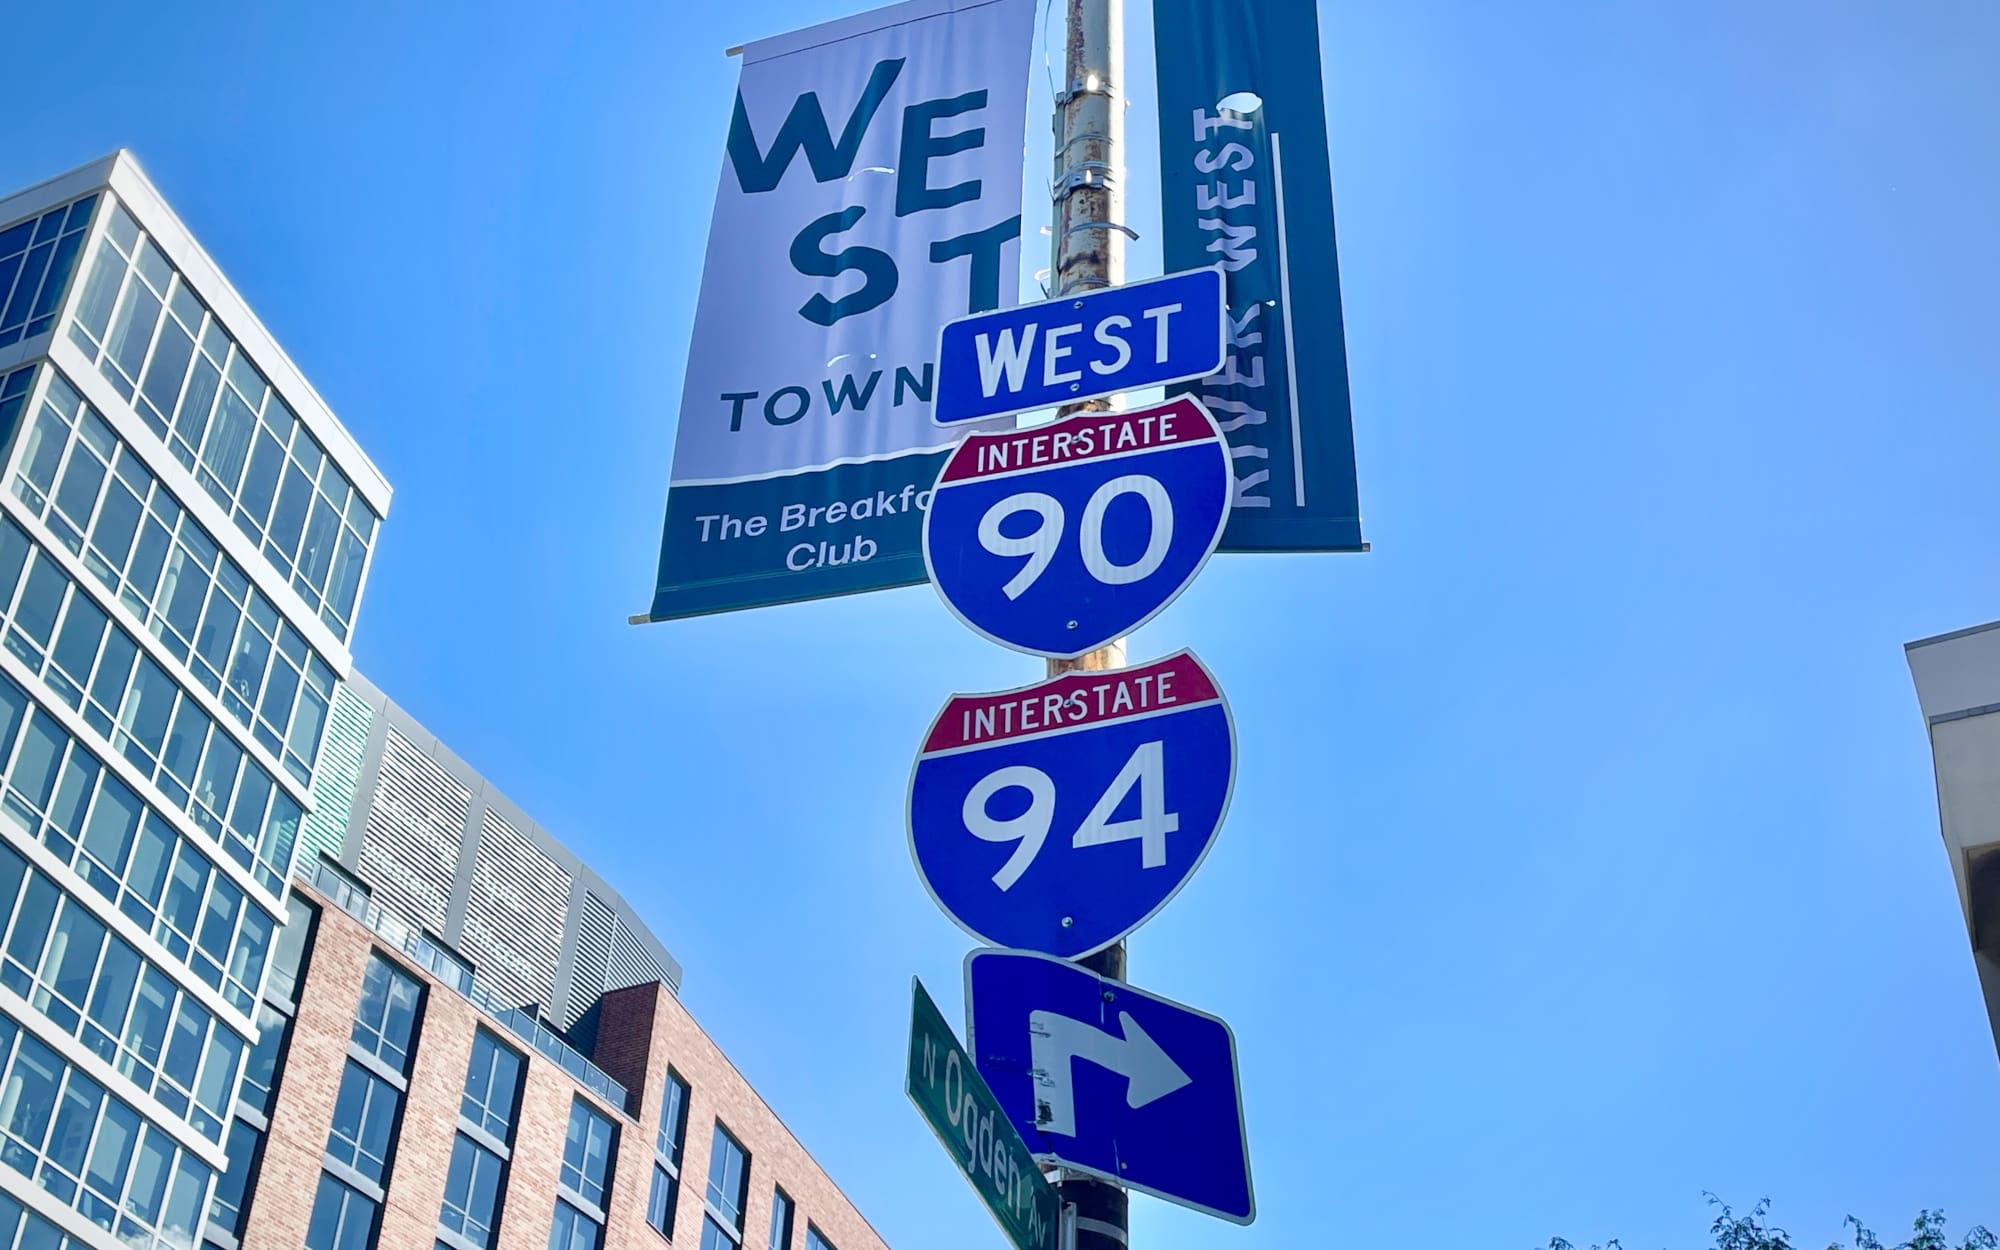 A photo of River West's 90/94 expressway signage